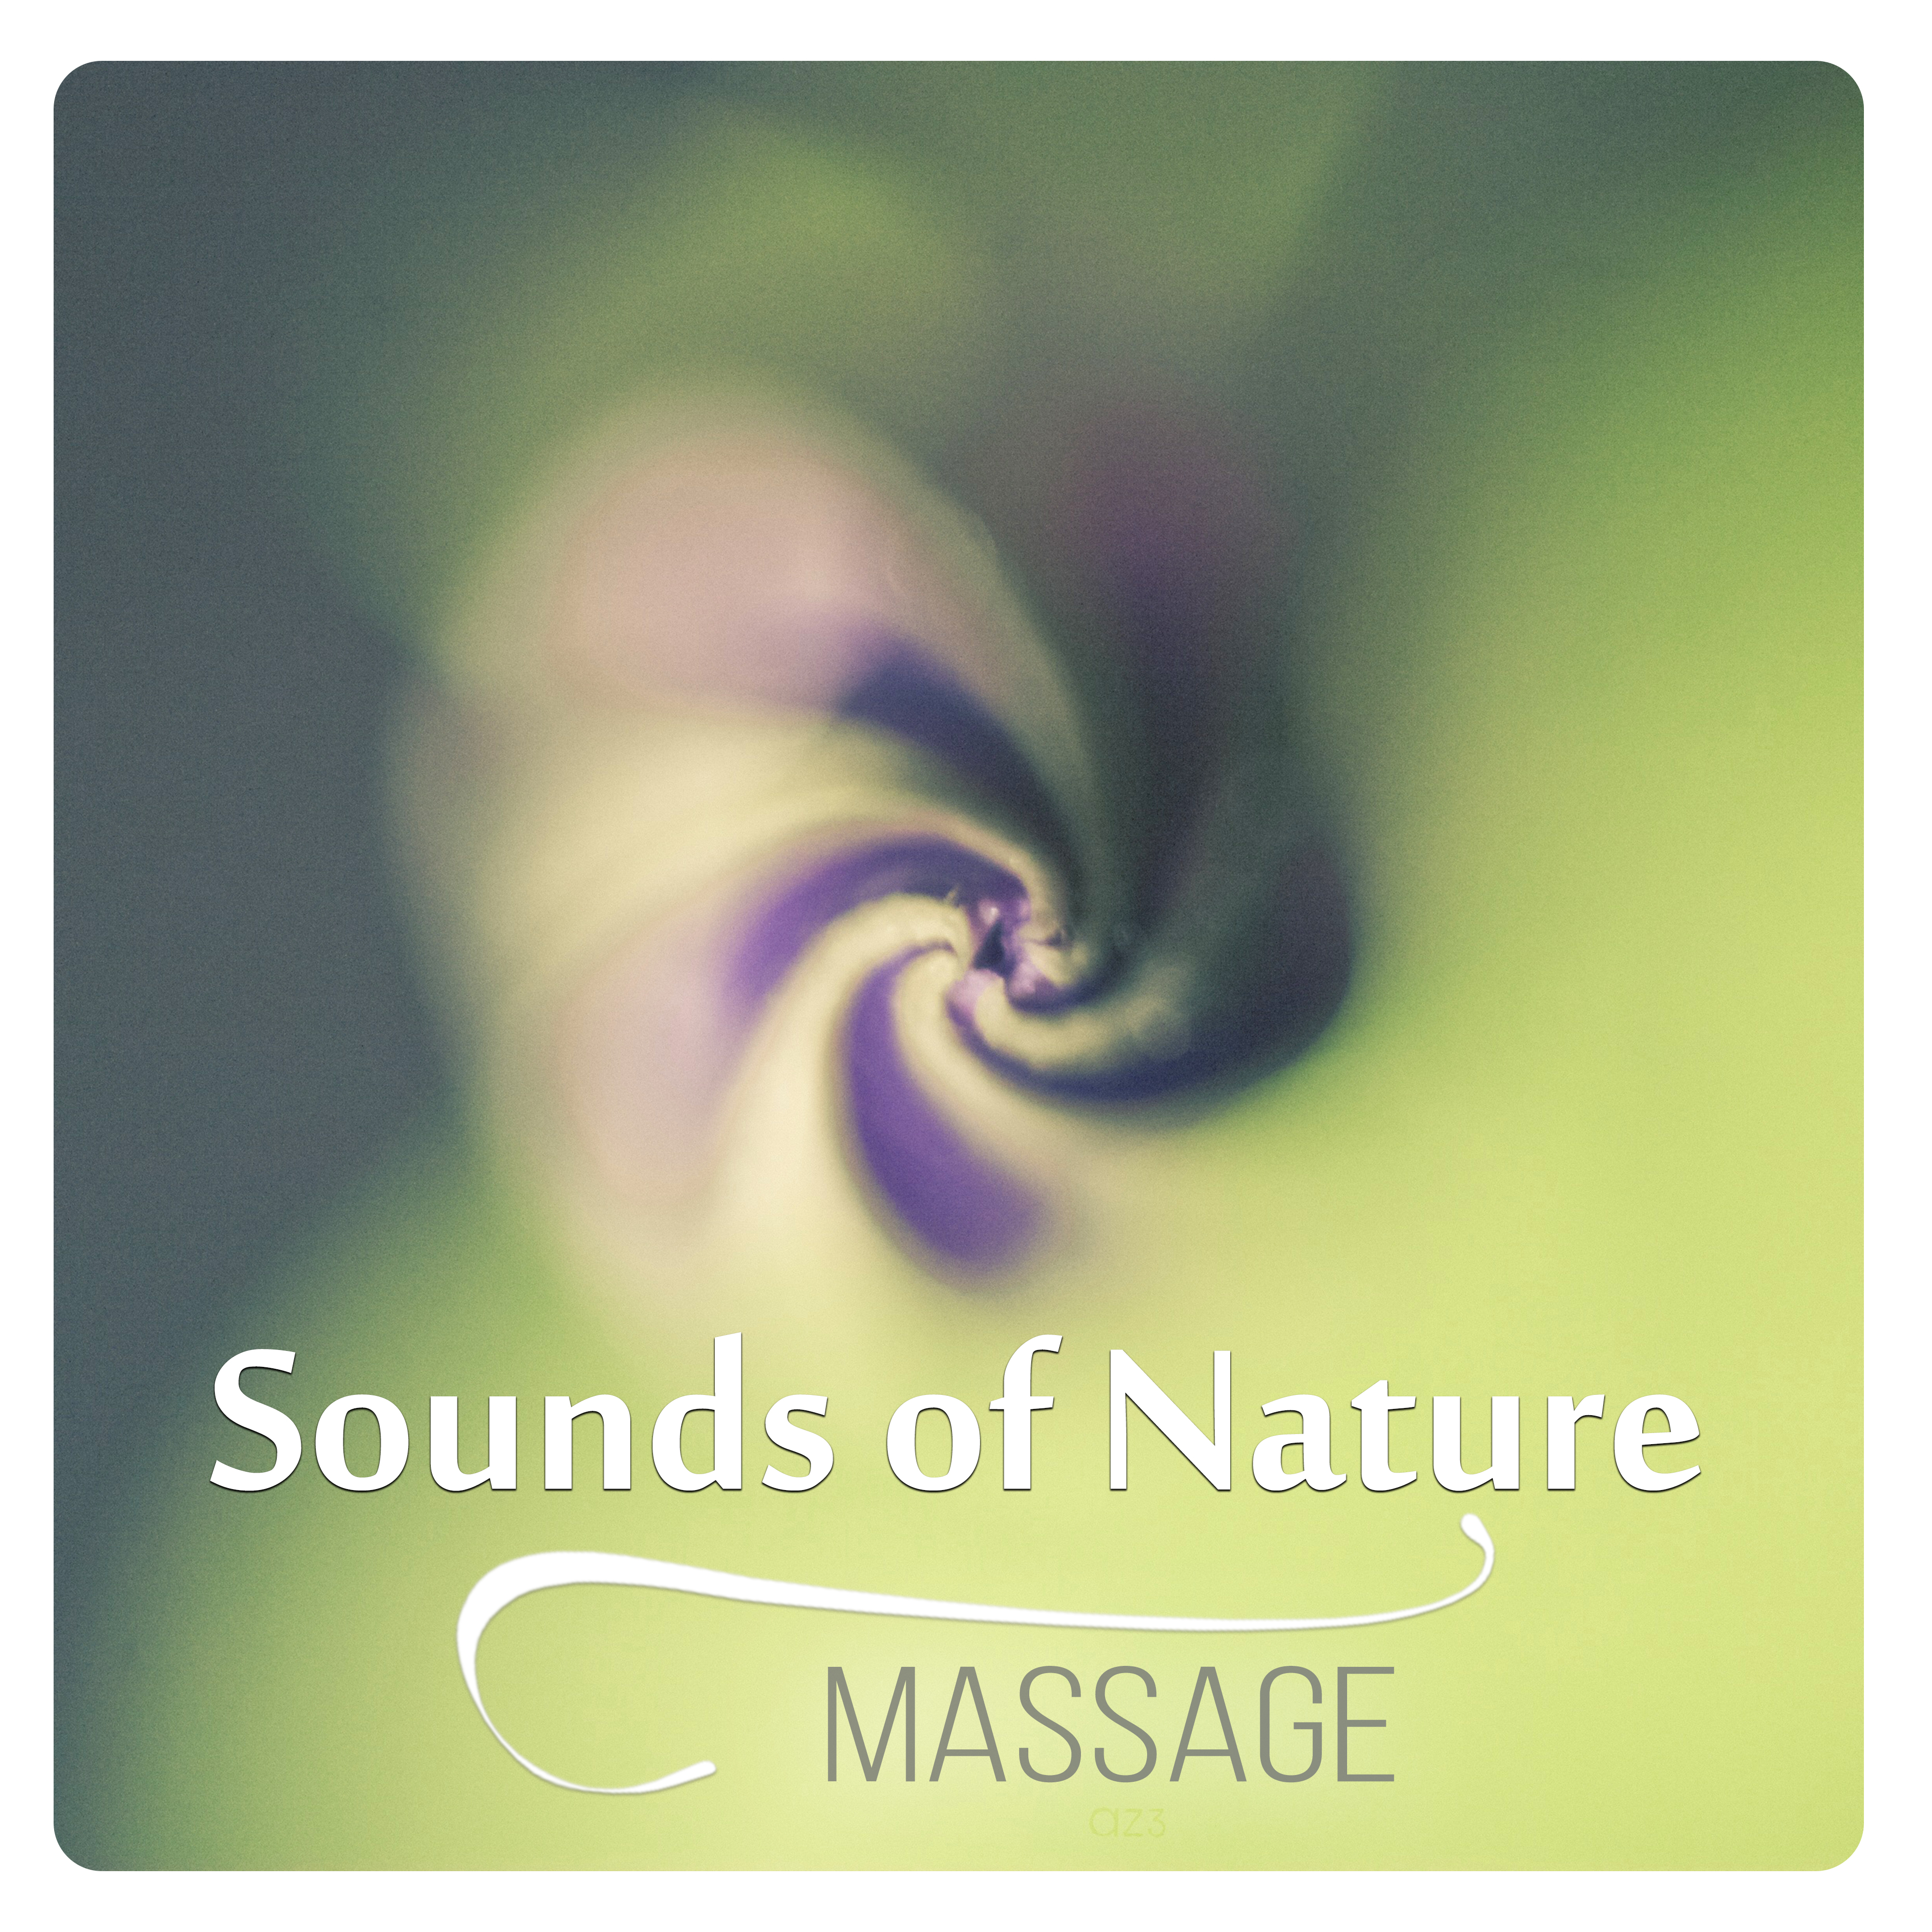 Sounds of Nature – Massage, Aromatherapy Relaxation in Bath SPA, Magic Moments, Serenity SPA, SPA & Wellness